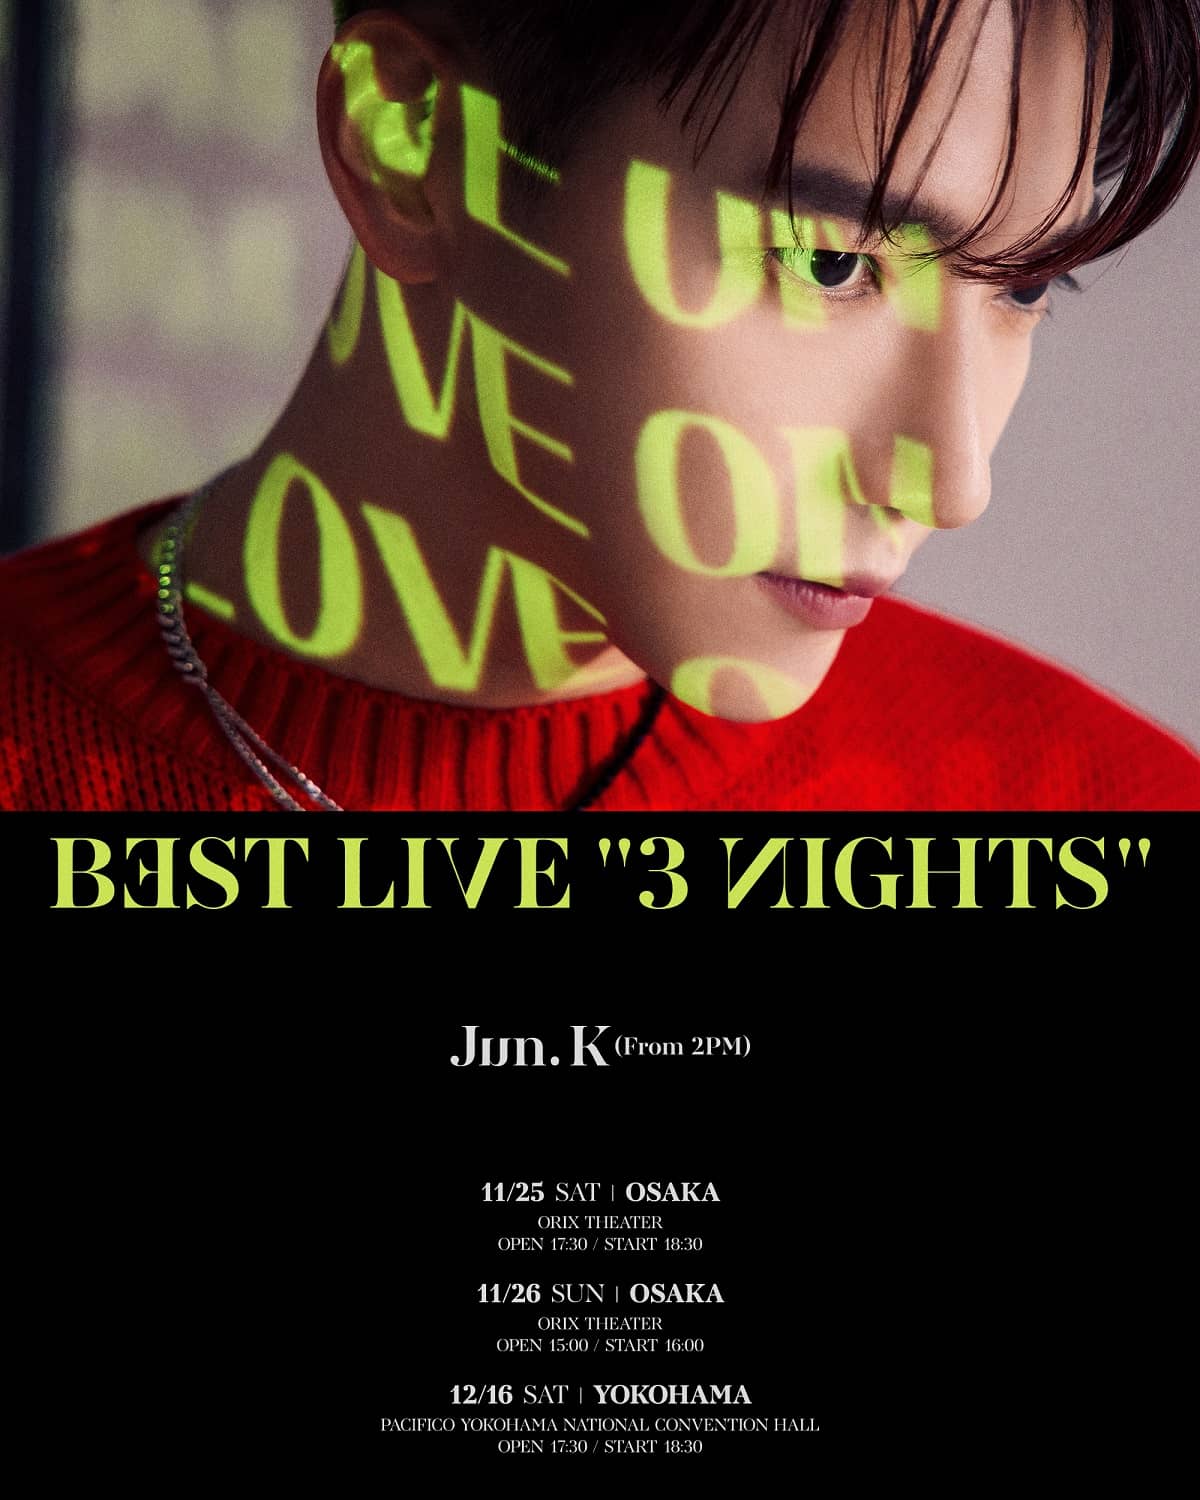 Jun. K (From 2PM) BEST LIVE “3 NIGHTS”